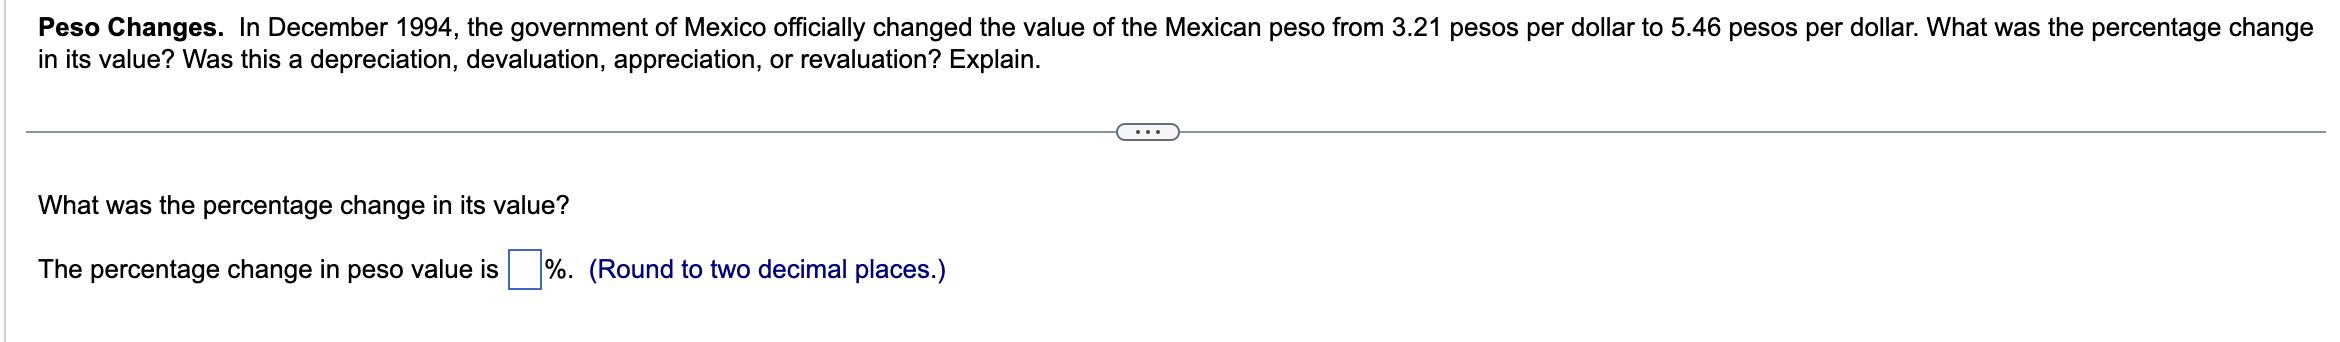 Peso Changes. In December 1994 , the government of Mexico officially changed the value of the Mexican peso from ( 3.21 ) pe